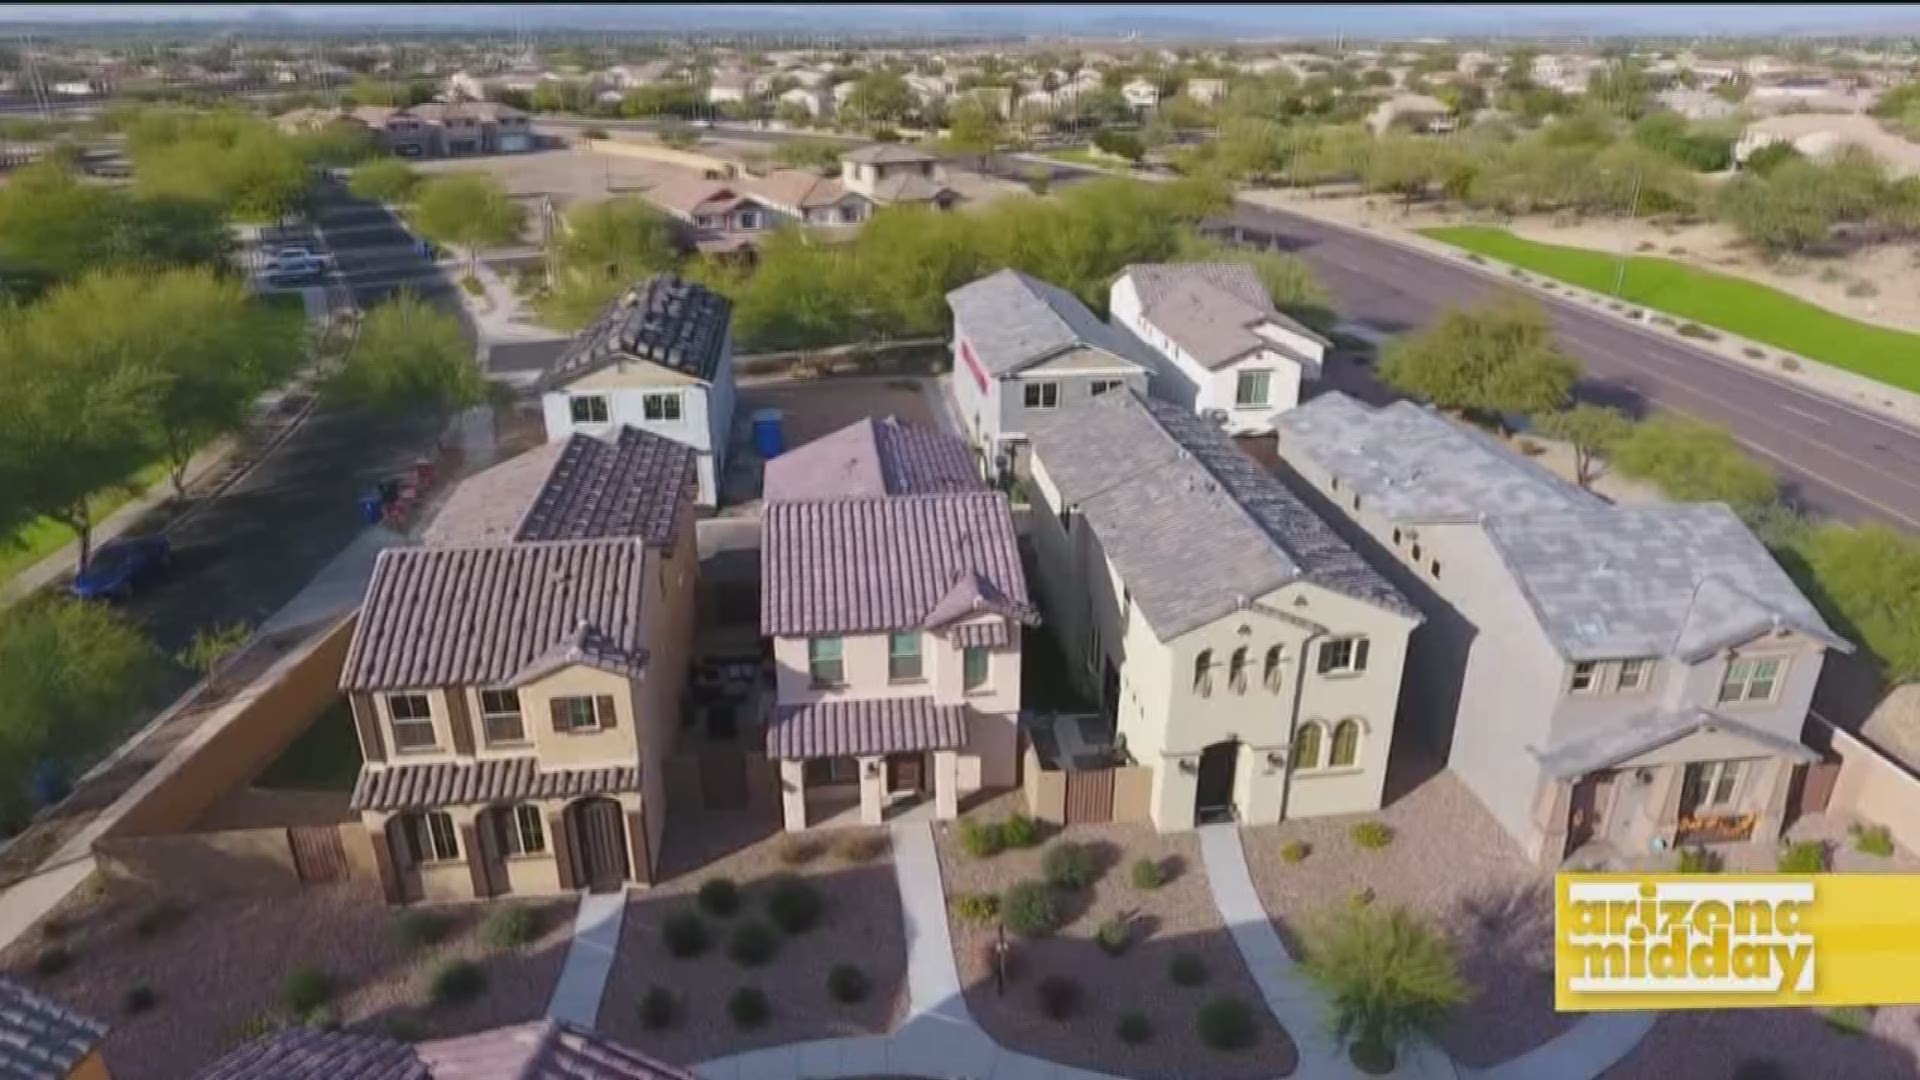 Wayne Funk with Bellago Homes shows us the stylish houses at Club Village Homes in Gold Canyon.